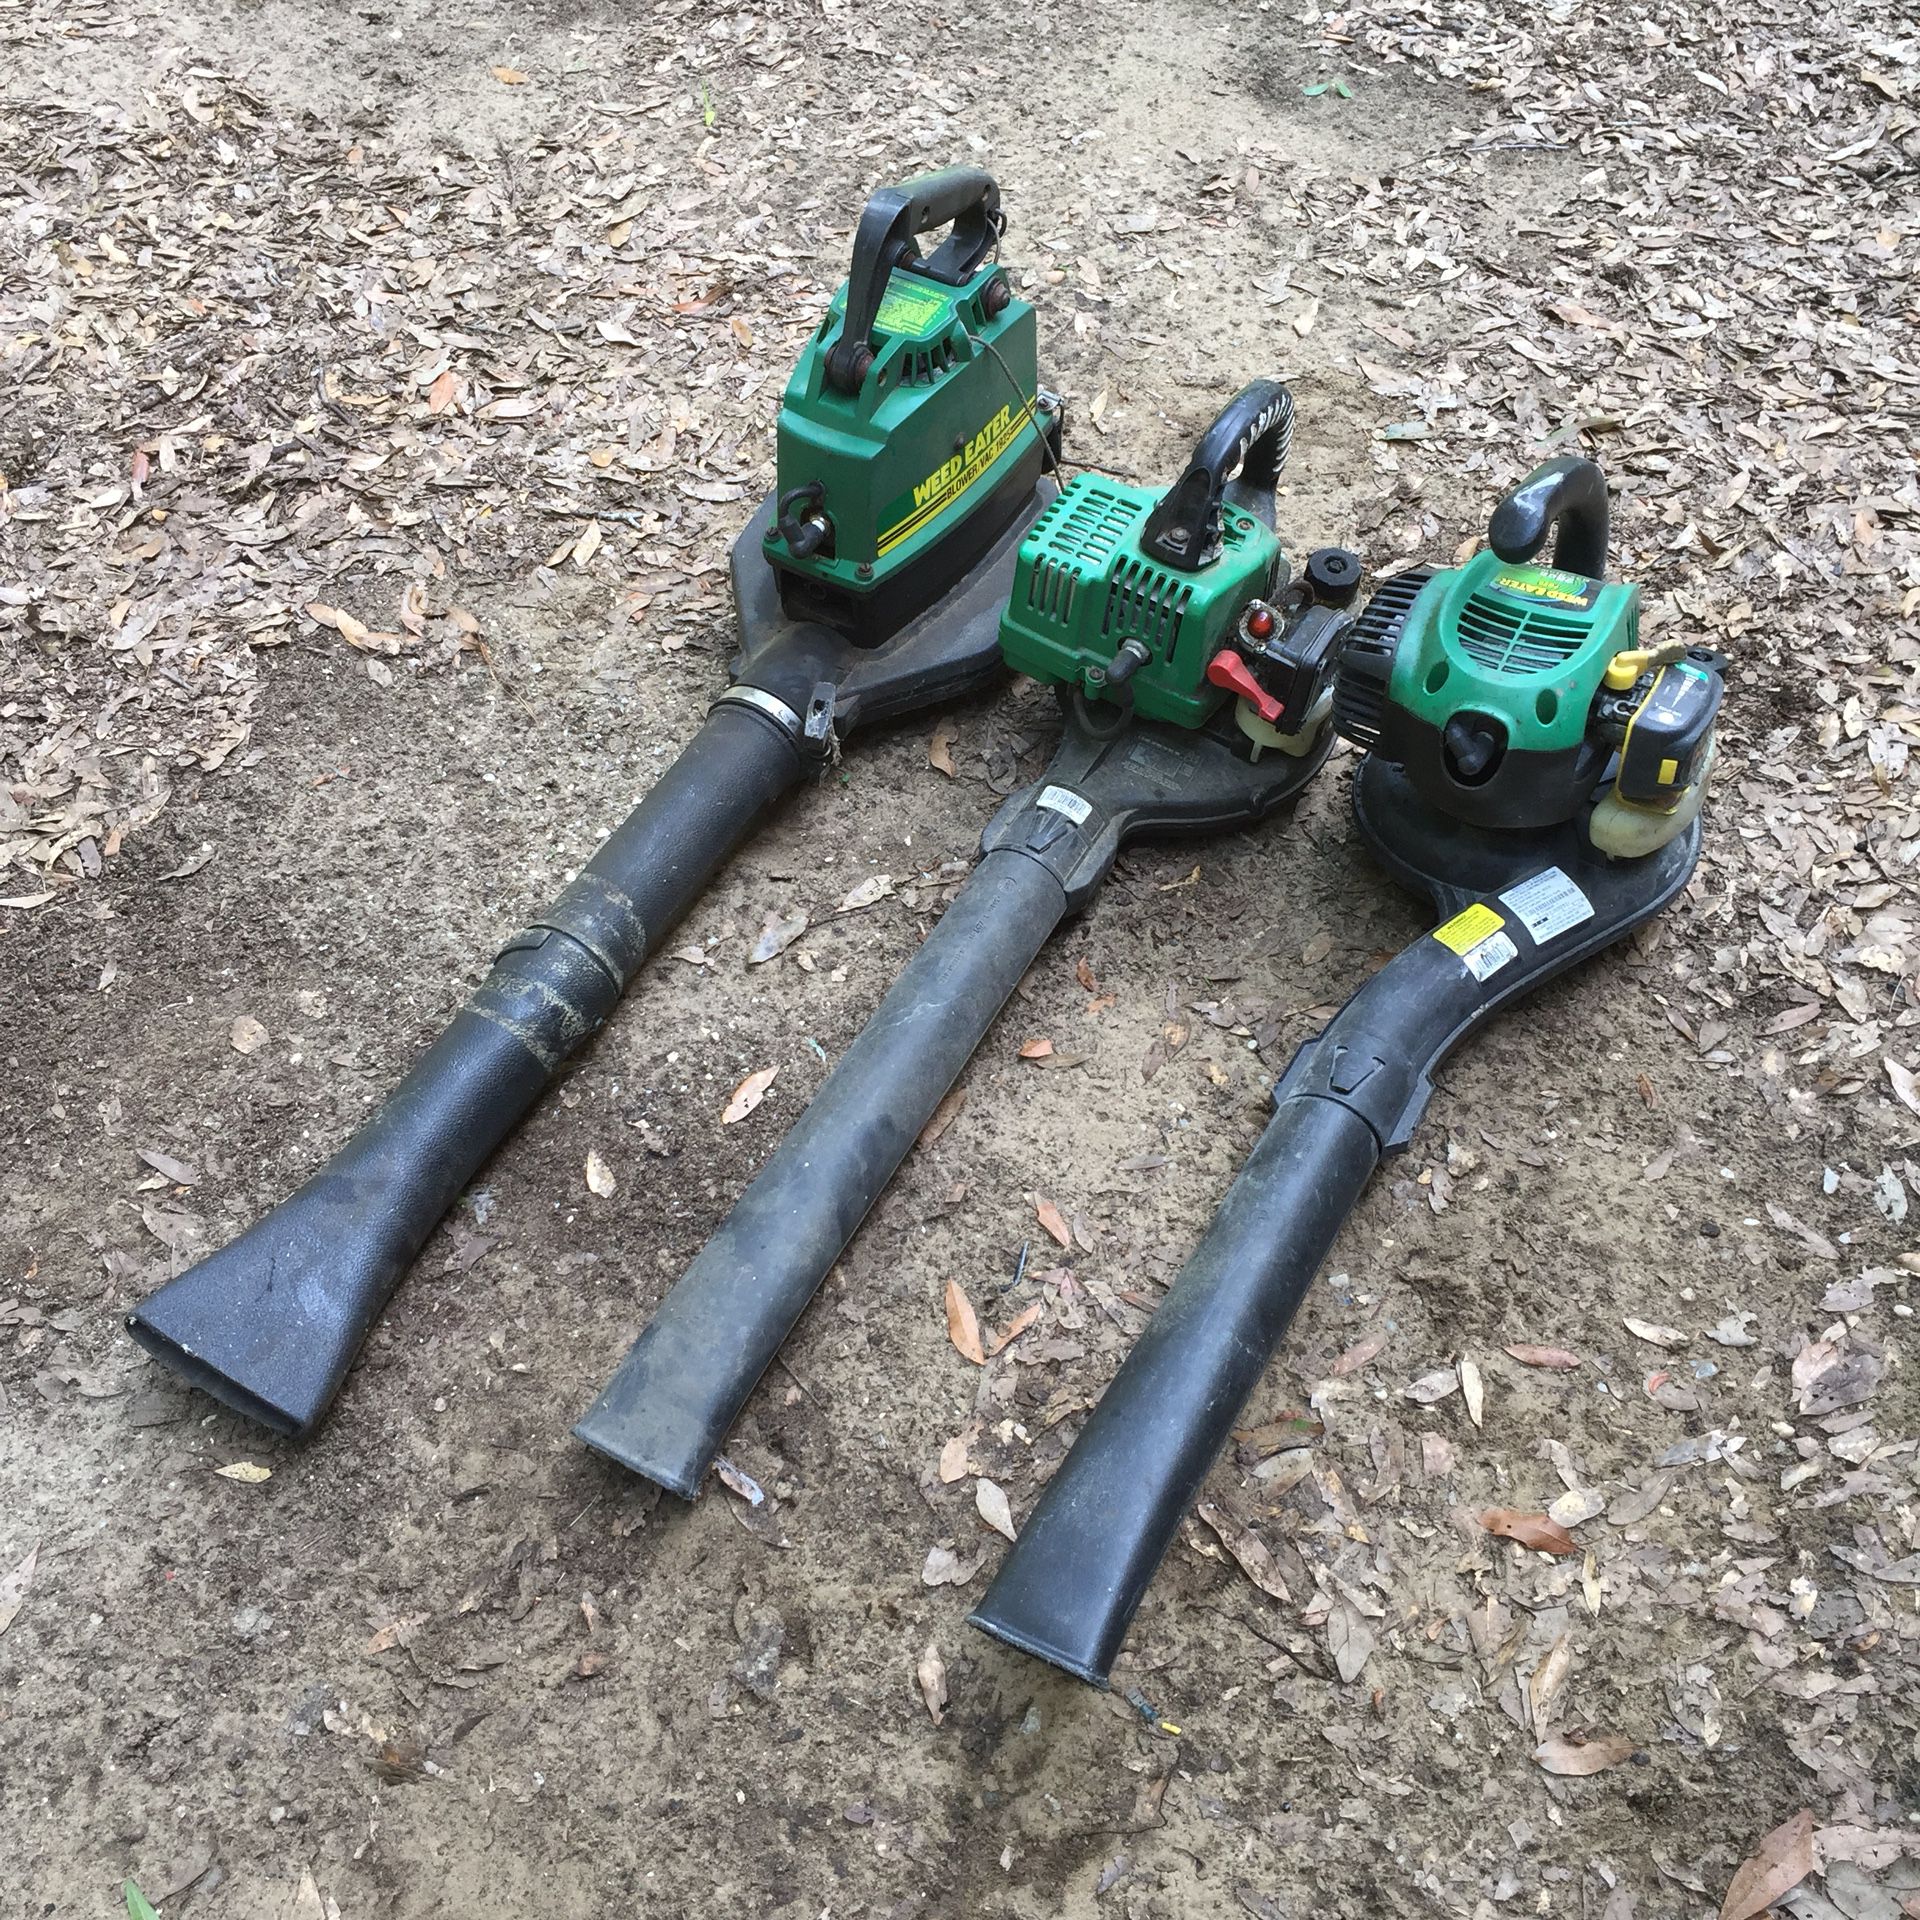 3 Untested Weedeater Gas Leaf Blowers